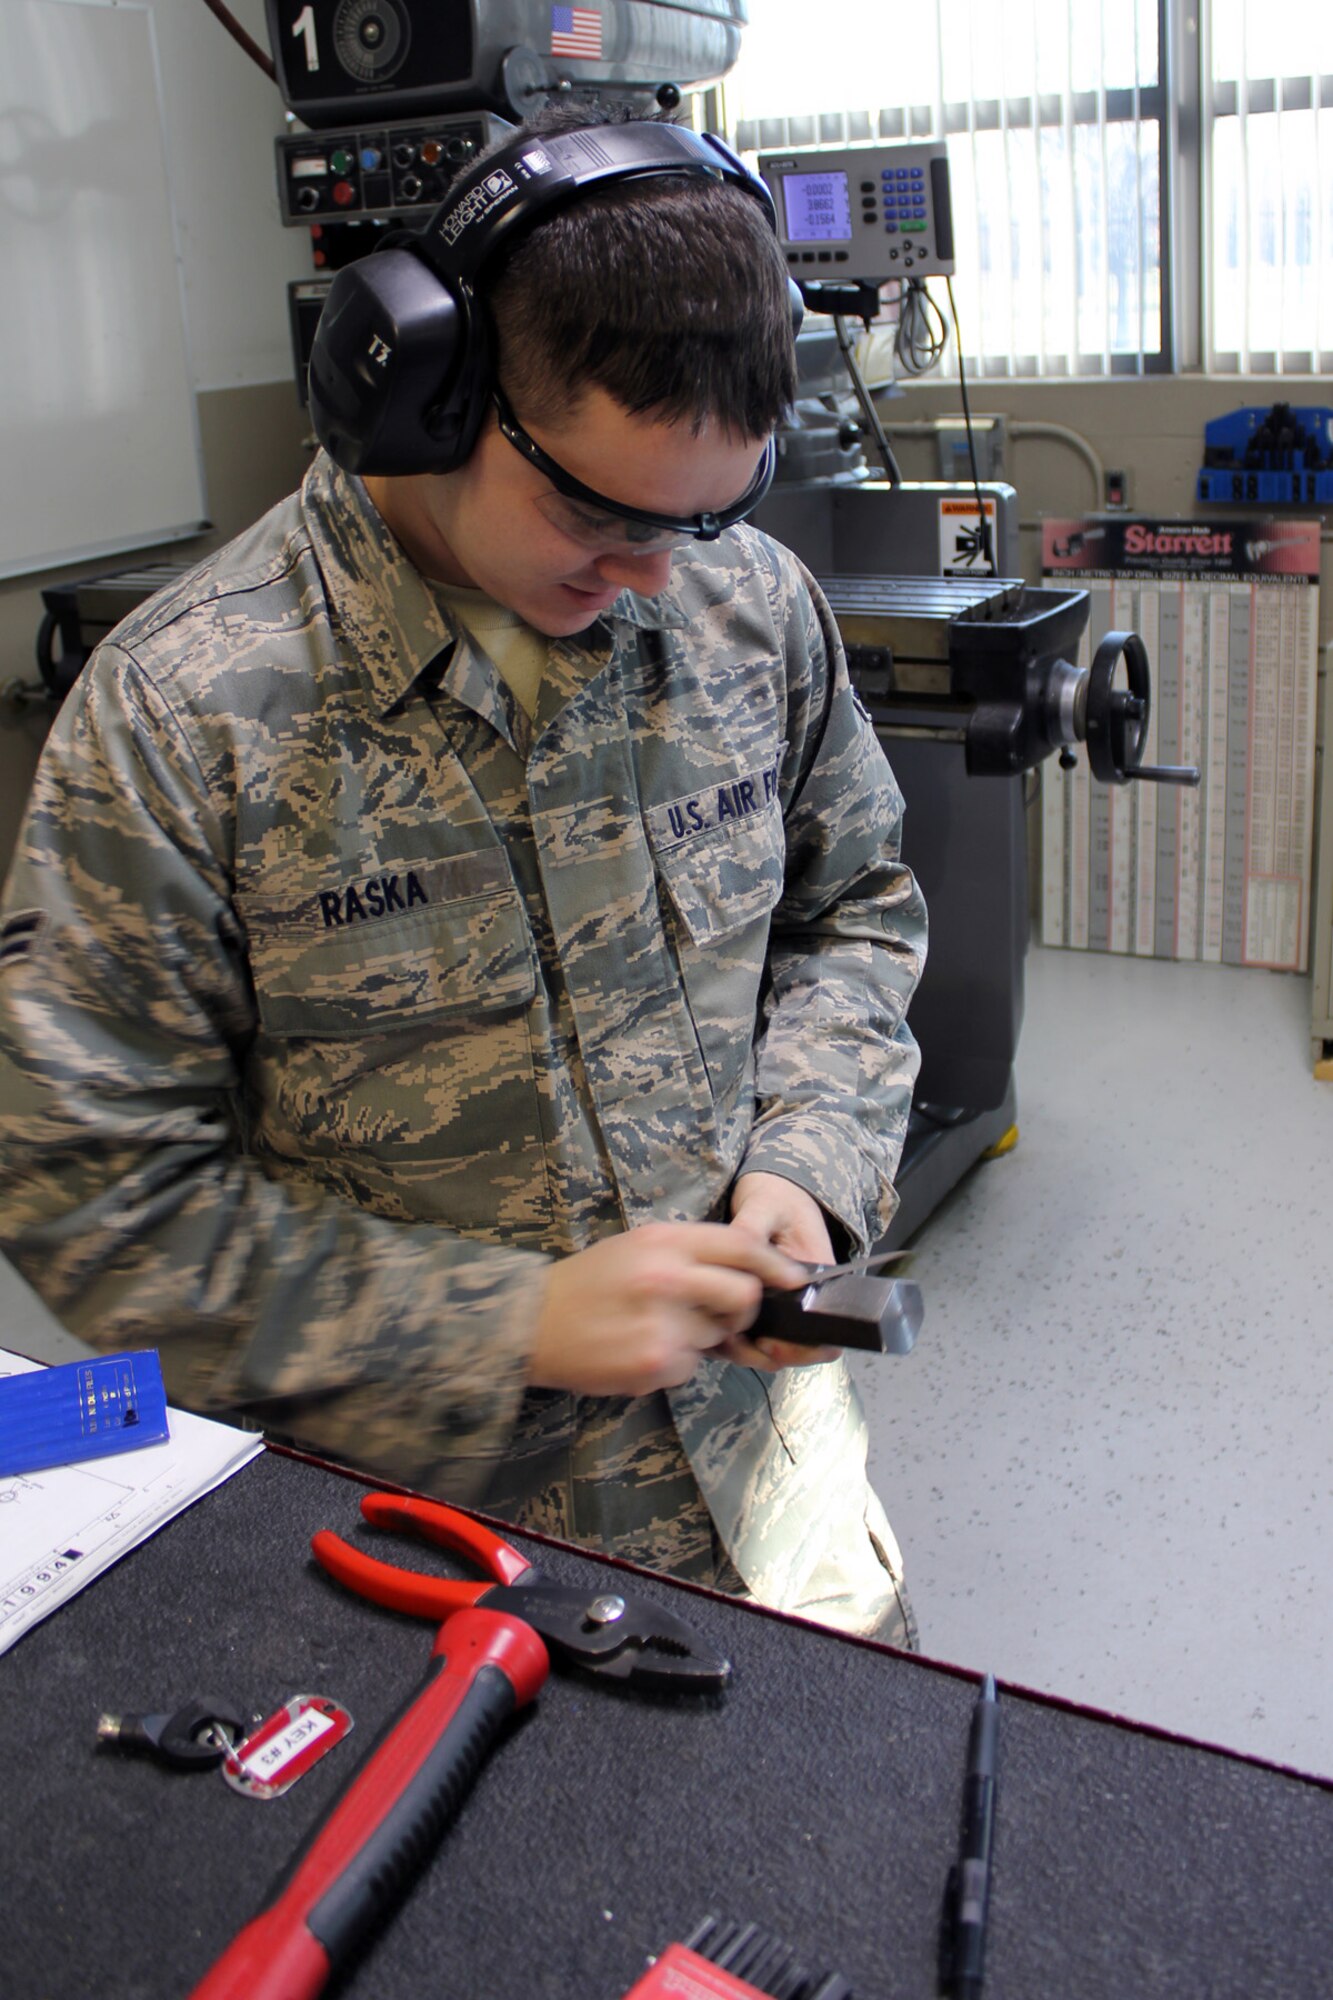 131207-Z-VA676-019 – Airman 1st Class Christopher Raska uses a file to remove any imperfections from an aircraft component he was fabricating at Selfridge Air National Guard Base, Mich., Dec. 7, 2013. A member of the 127th Wing for two years, Raska is a student at Ferris State University. (U.S. Air National Guard photo by TSgt. Dan Heaton / Released)